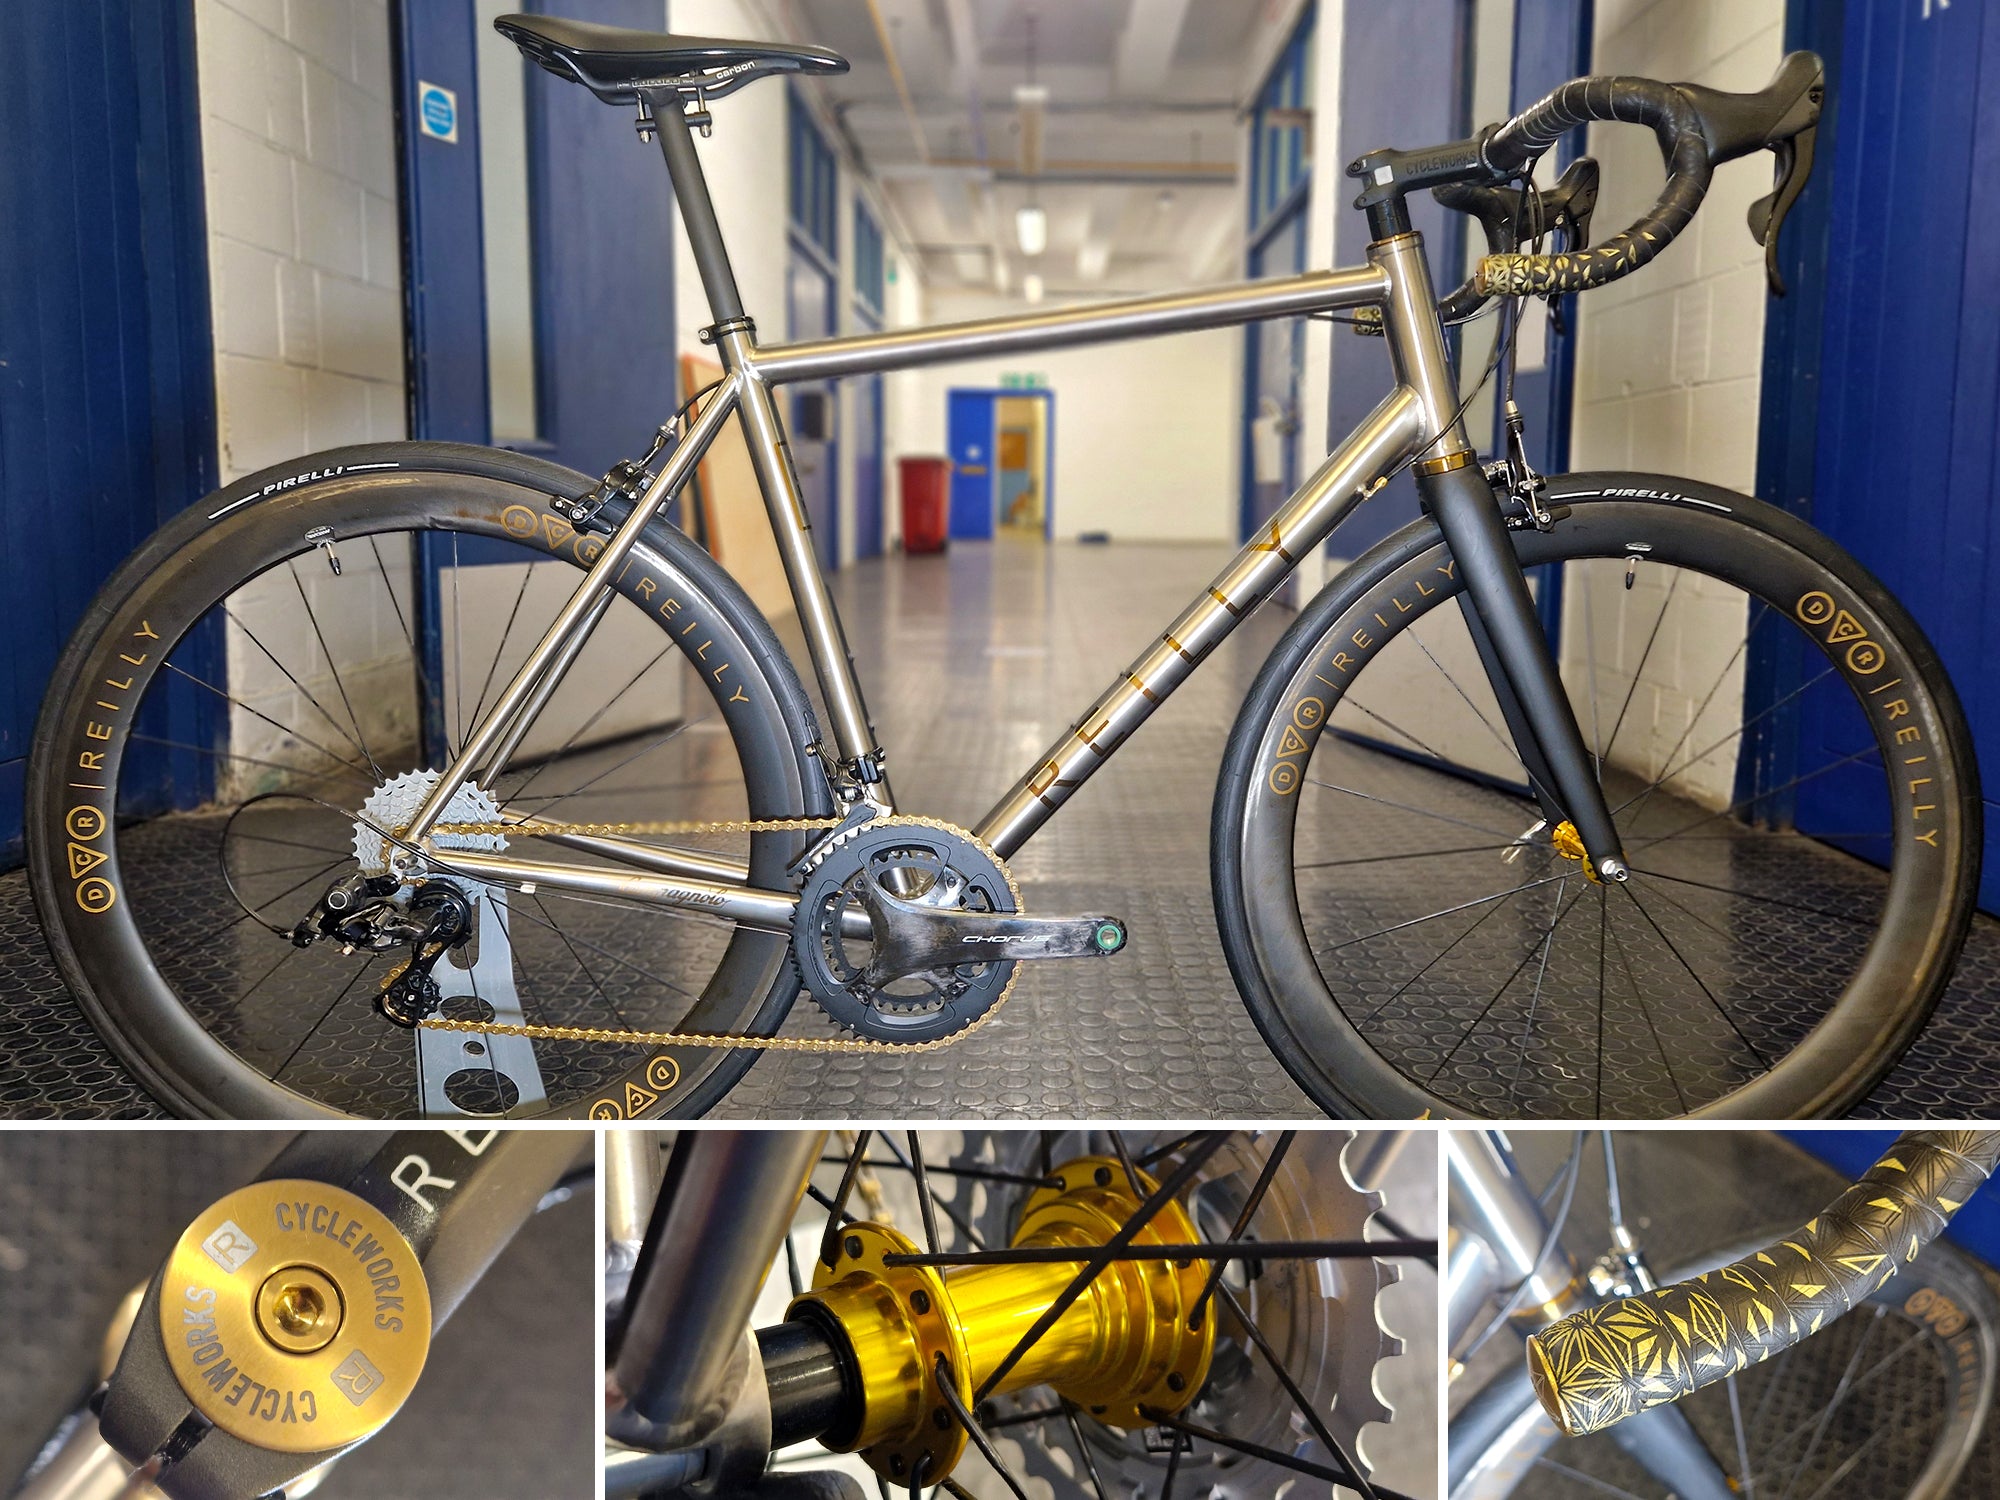 Side image of the gold trim T325 road bike plus close up of the gold hubs, gold headset and gold handlebar tape.